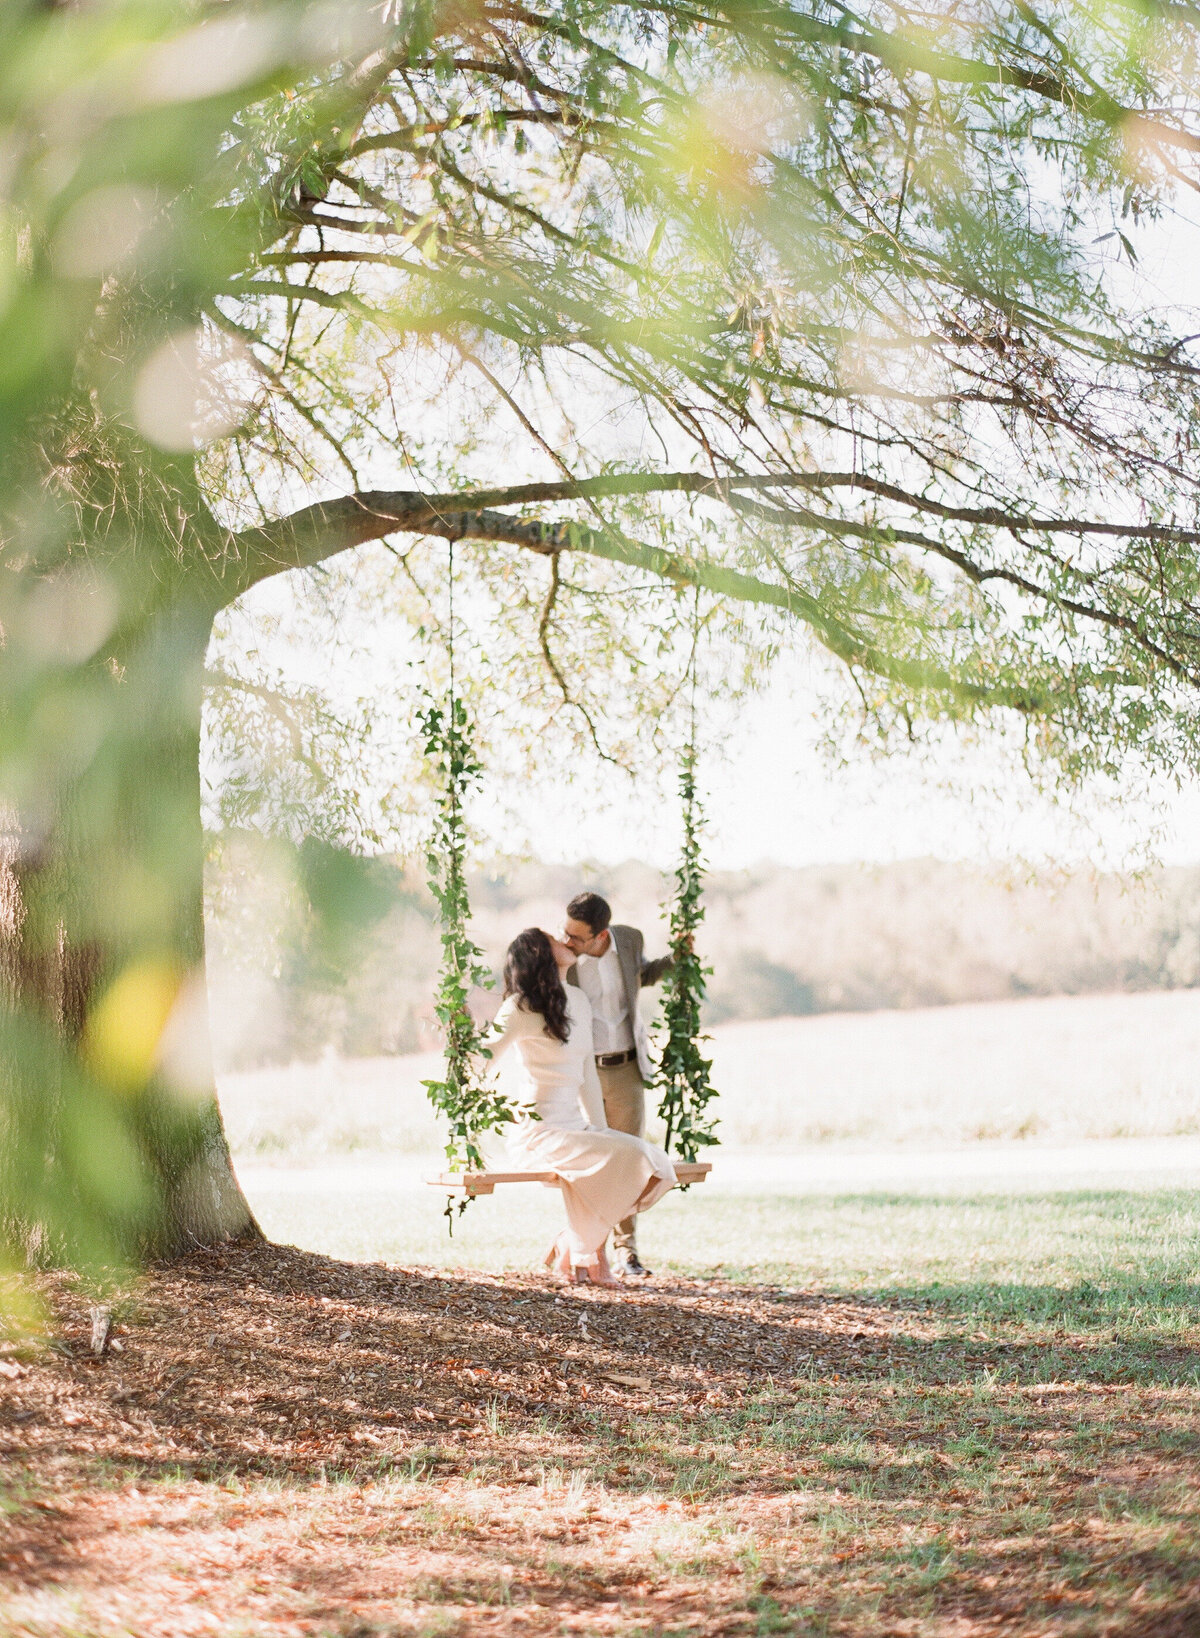 French Vineyard Engagement Photography at The Meadows in Raleigh, NC 1